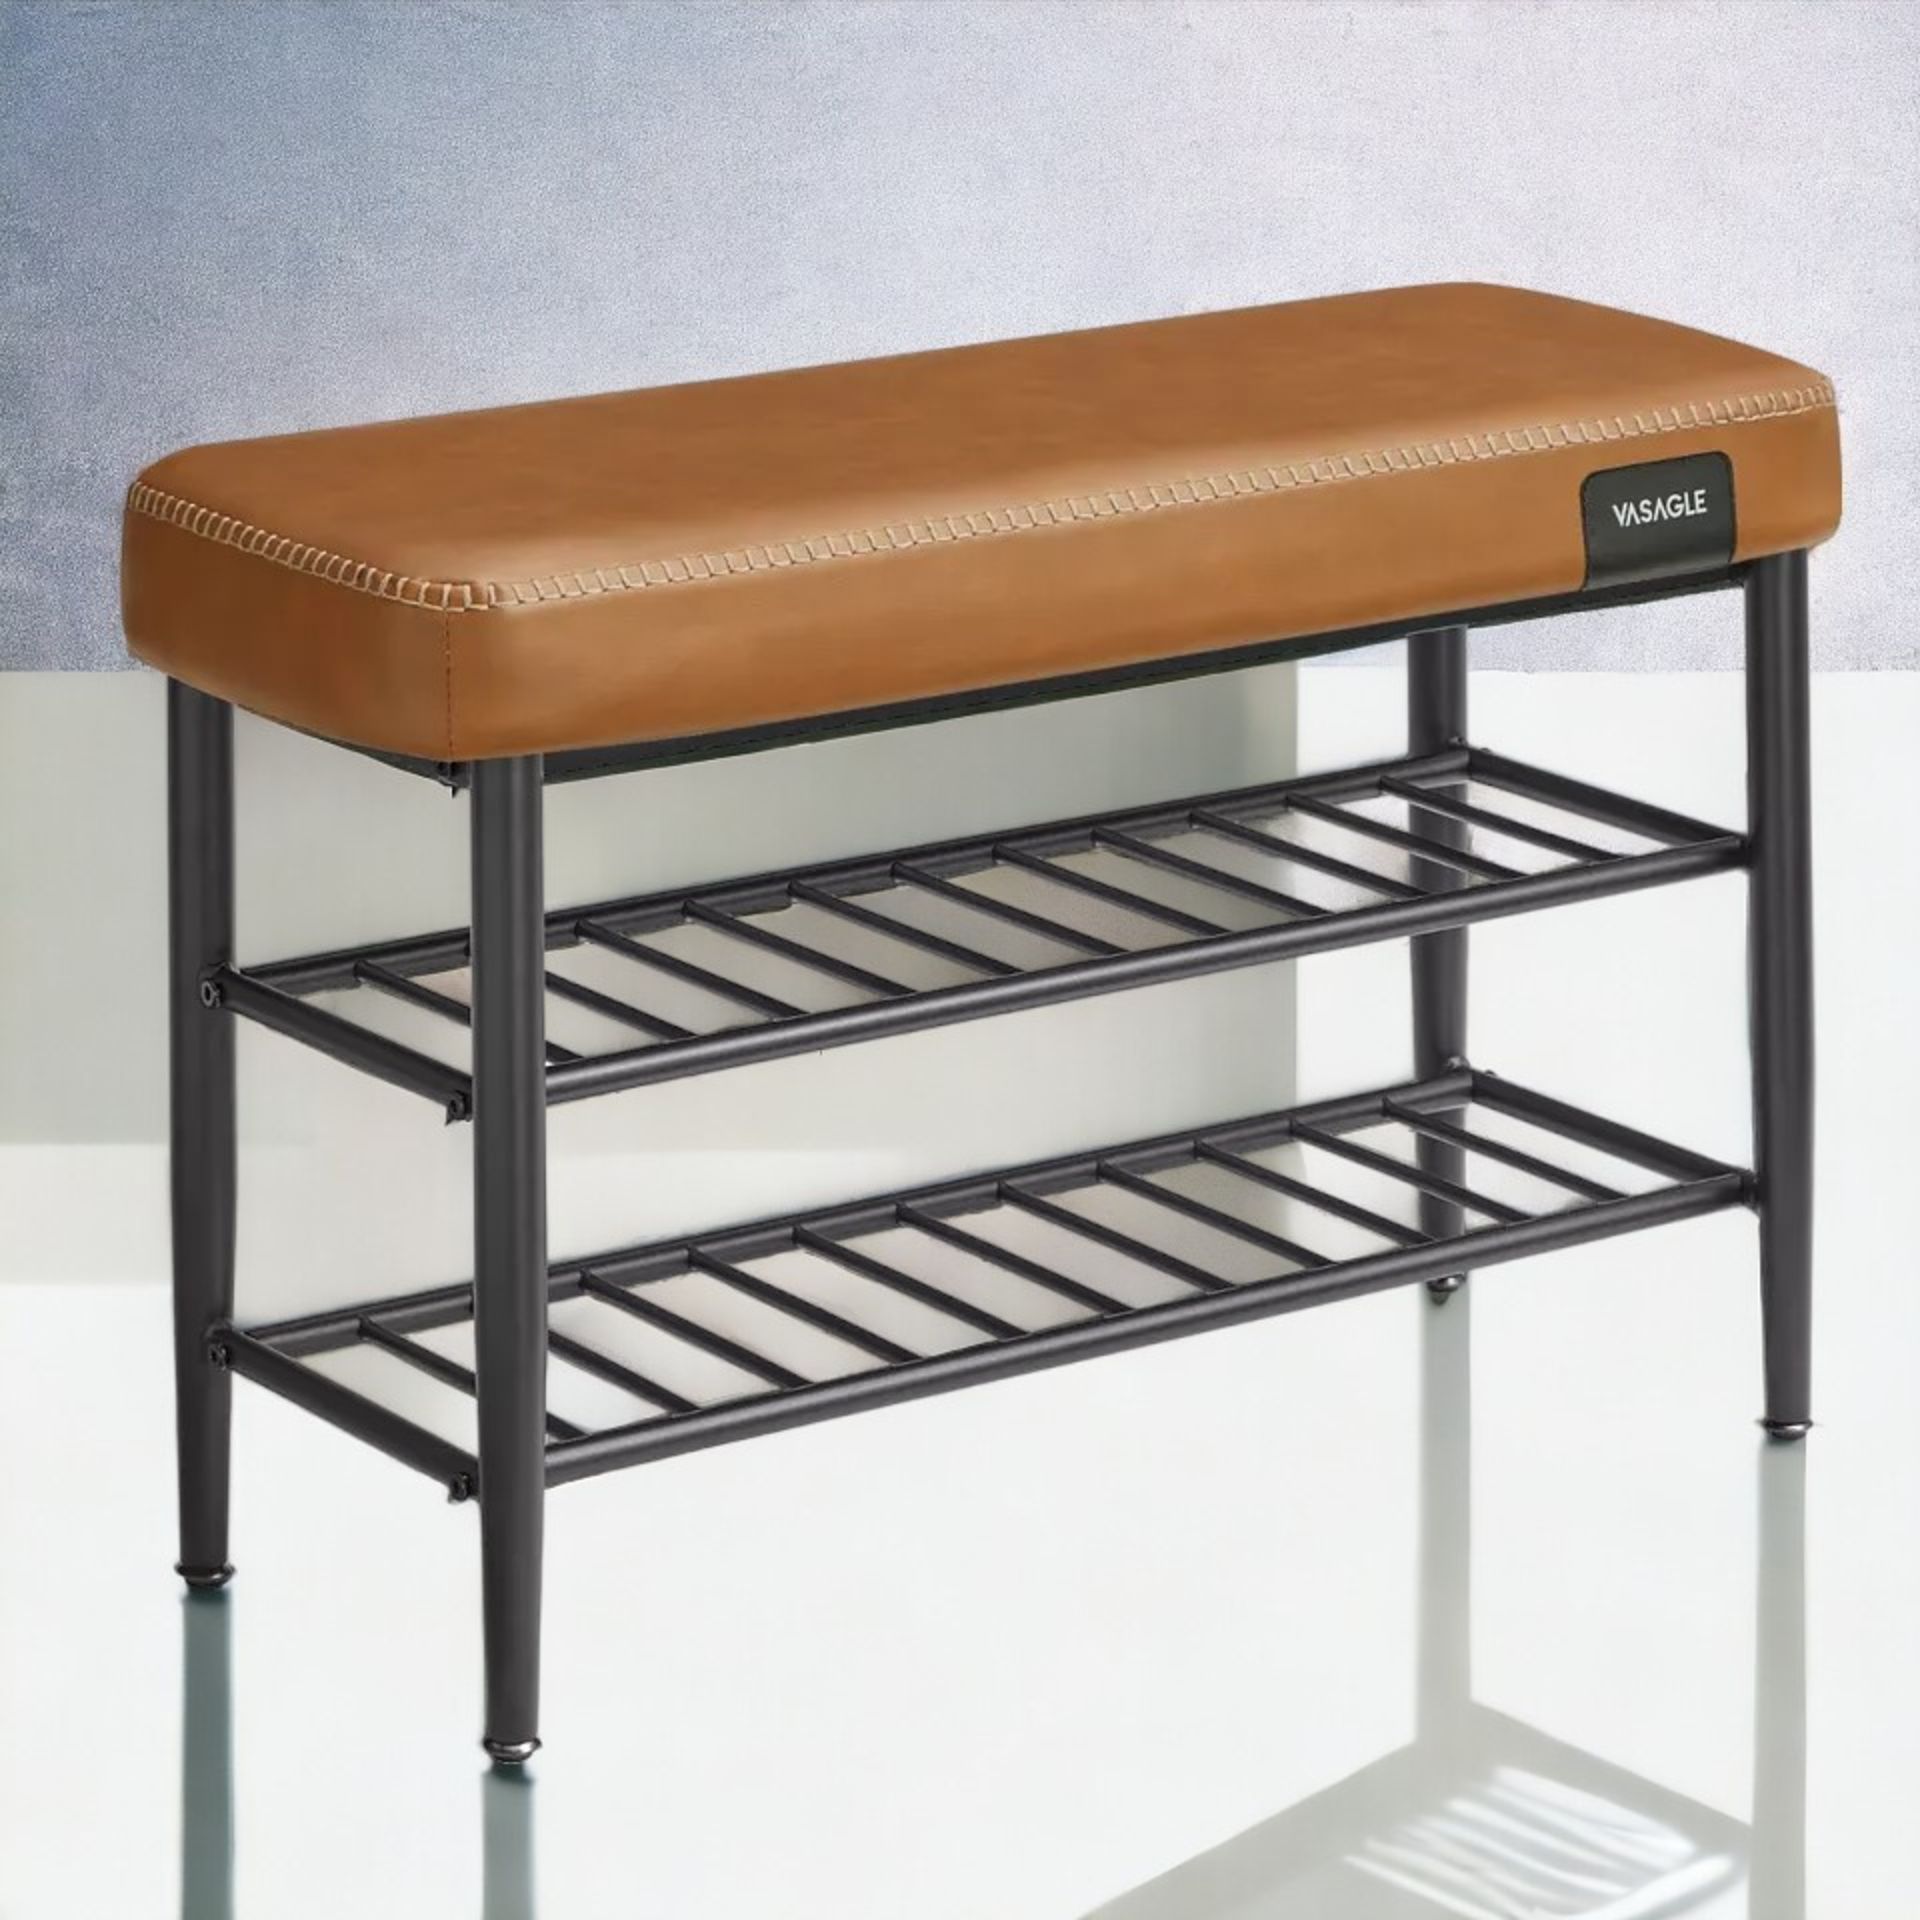 FREE DELIVERY - BRAND NEW SHOE BENCH STORAGE BENCH SHOE RACK SYNTHETIC LEATHER